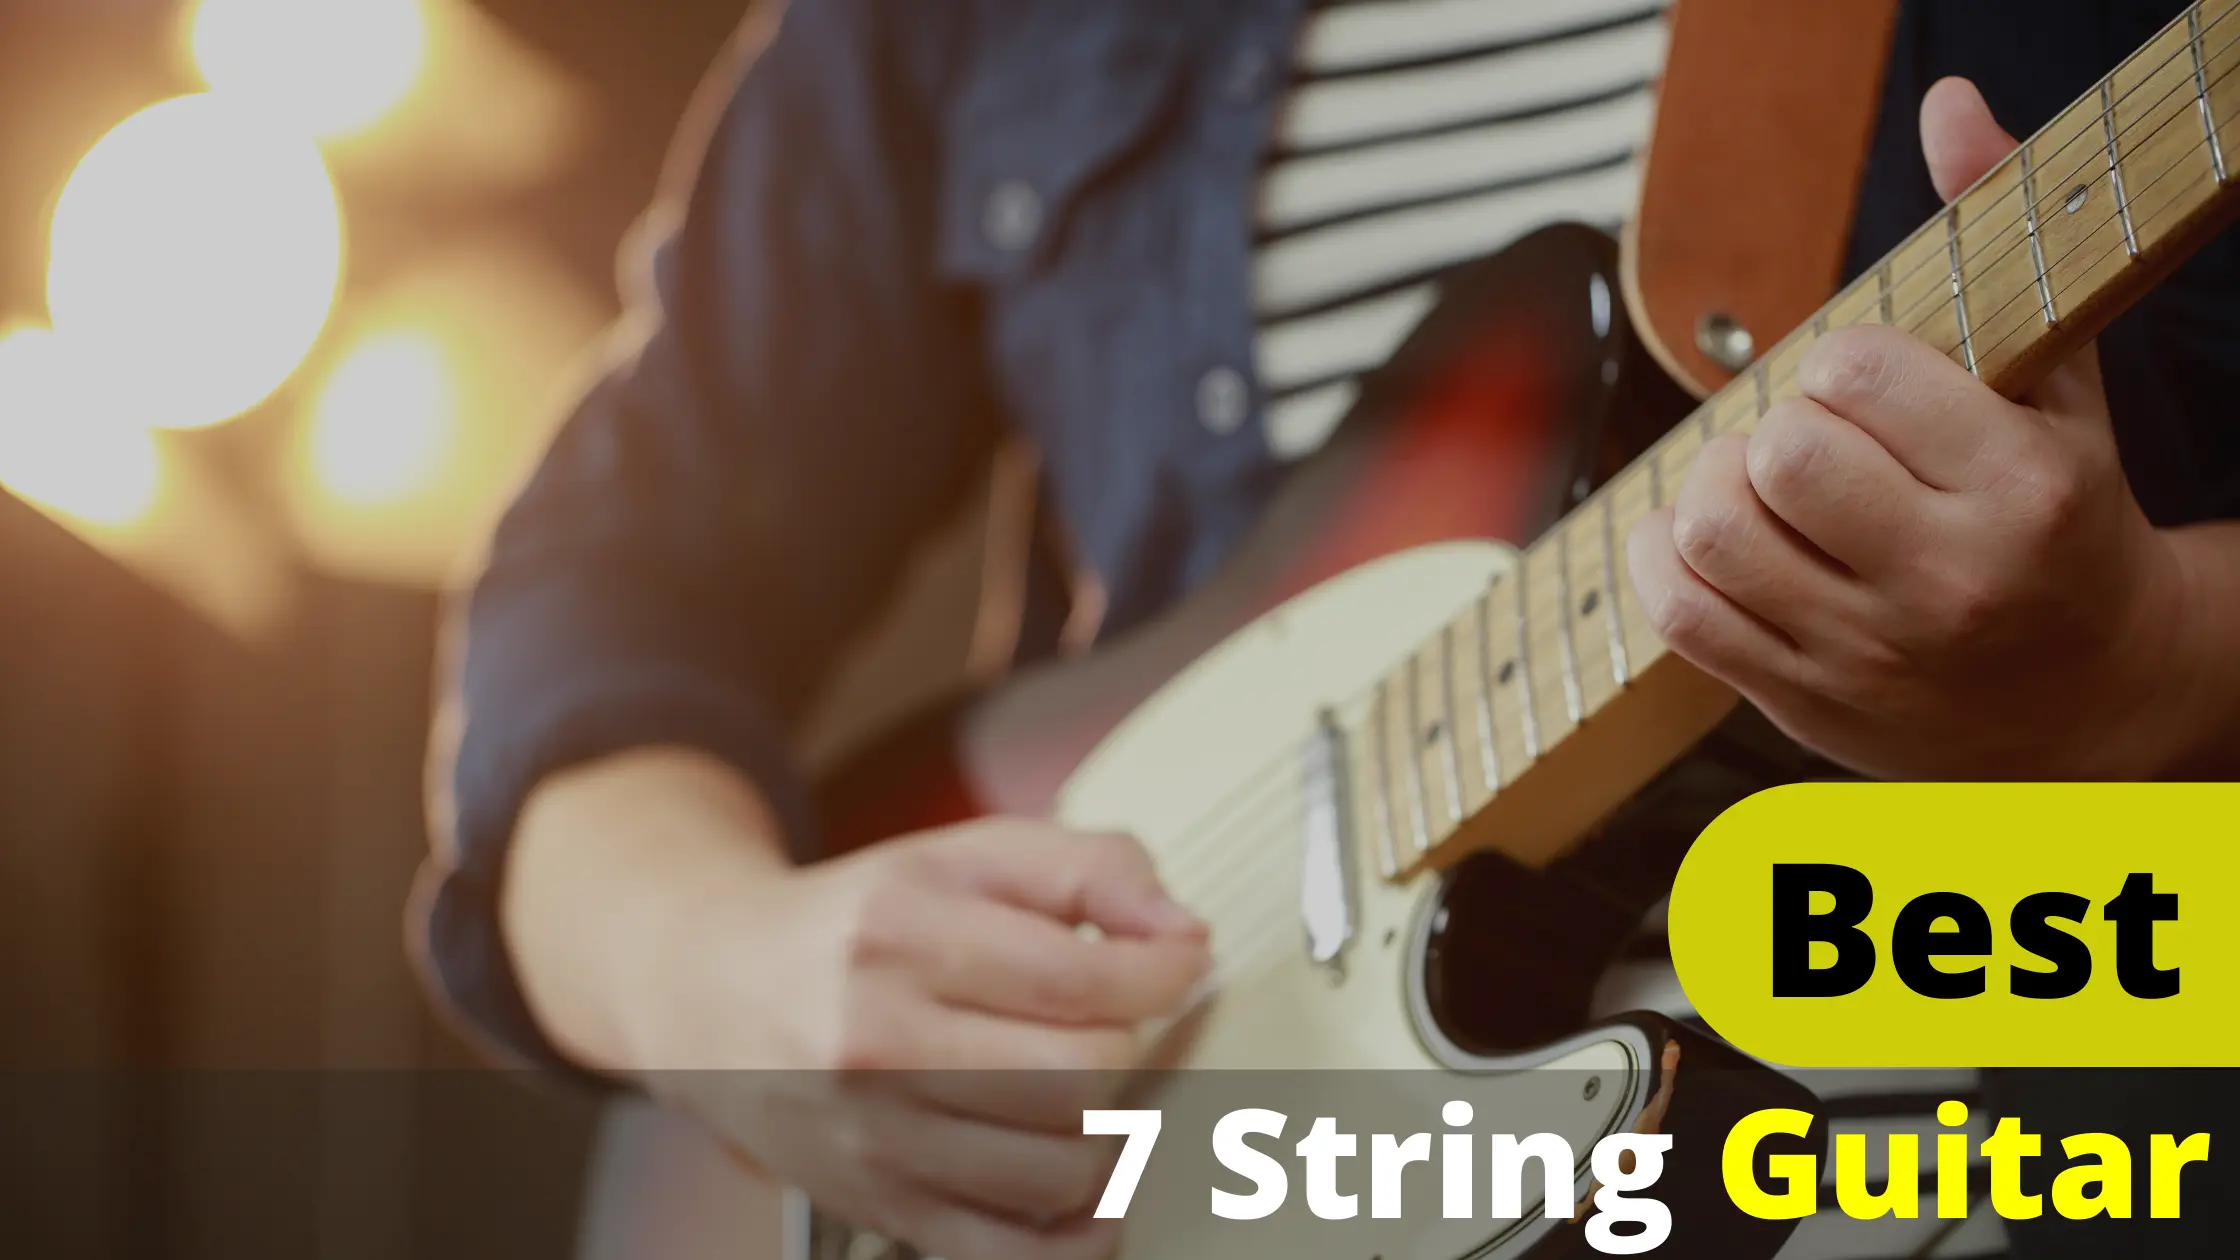 Top 10 Best 7 String Guitar Reviews and Buying Guide 2022